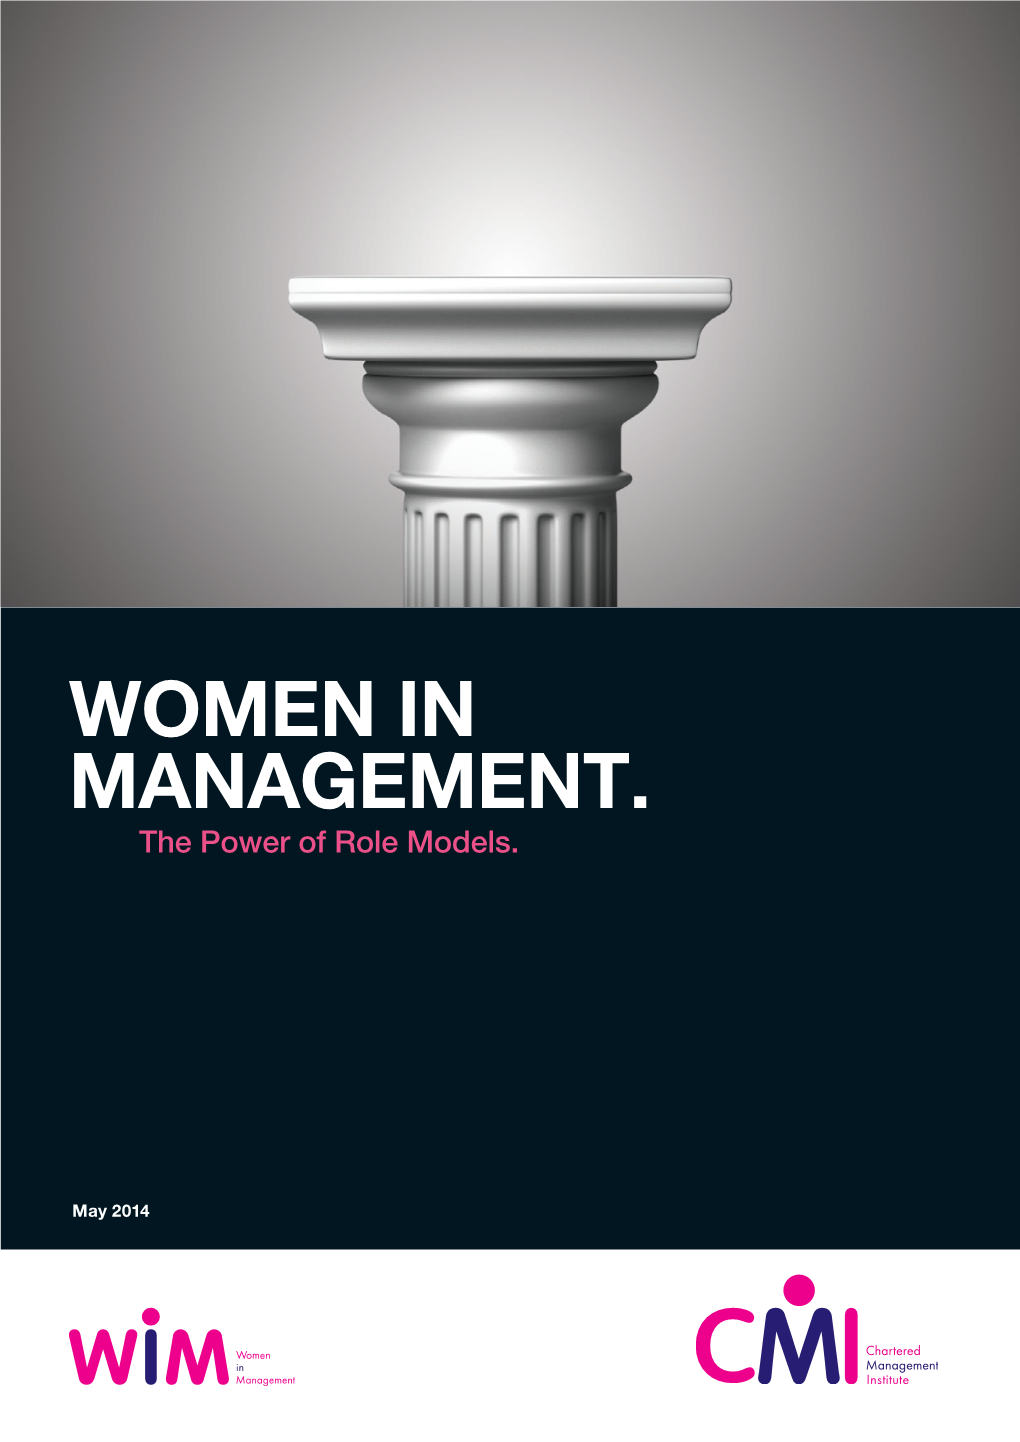 WOMEN in MANAGEMENT. the Power of Role Models